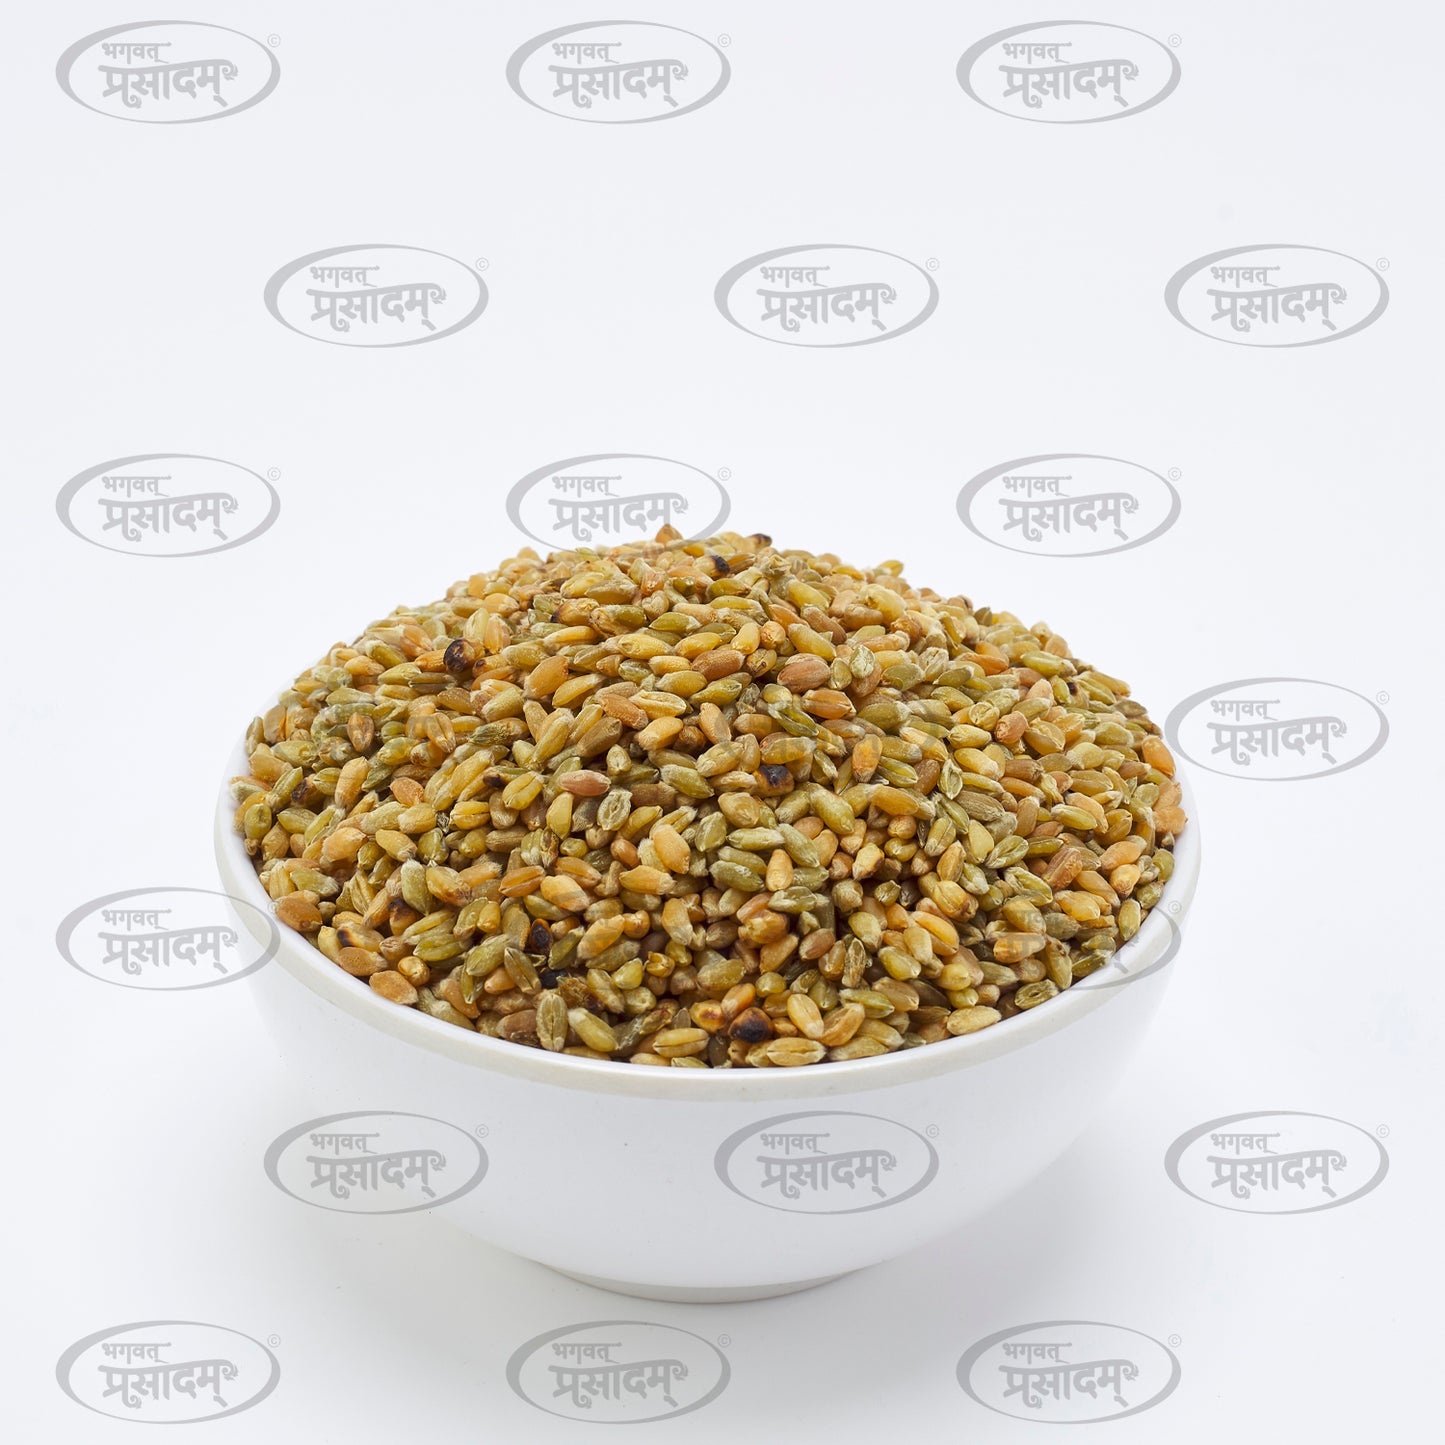 Wheat Ponk (Roasted Green Wheat) - Wholesome and Crunchy Snack by Bhagvat Prasadam